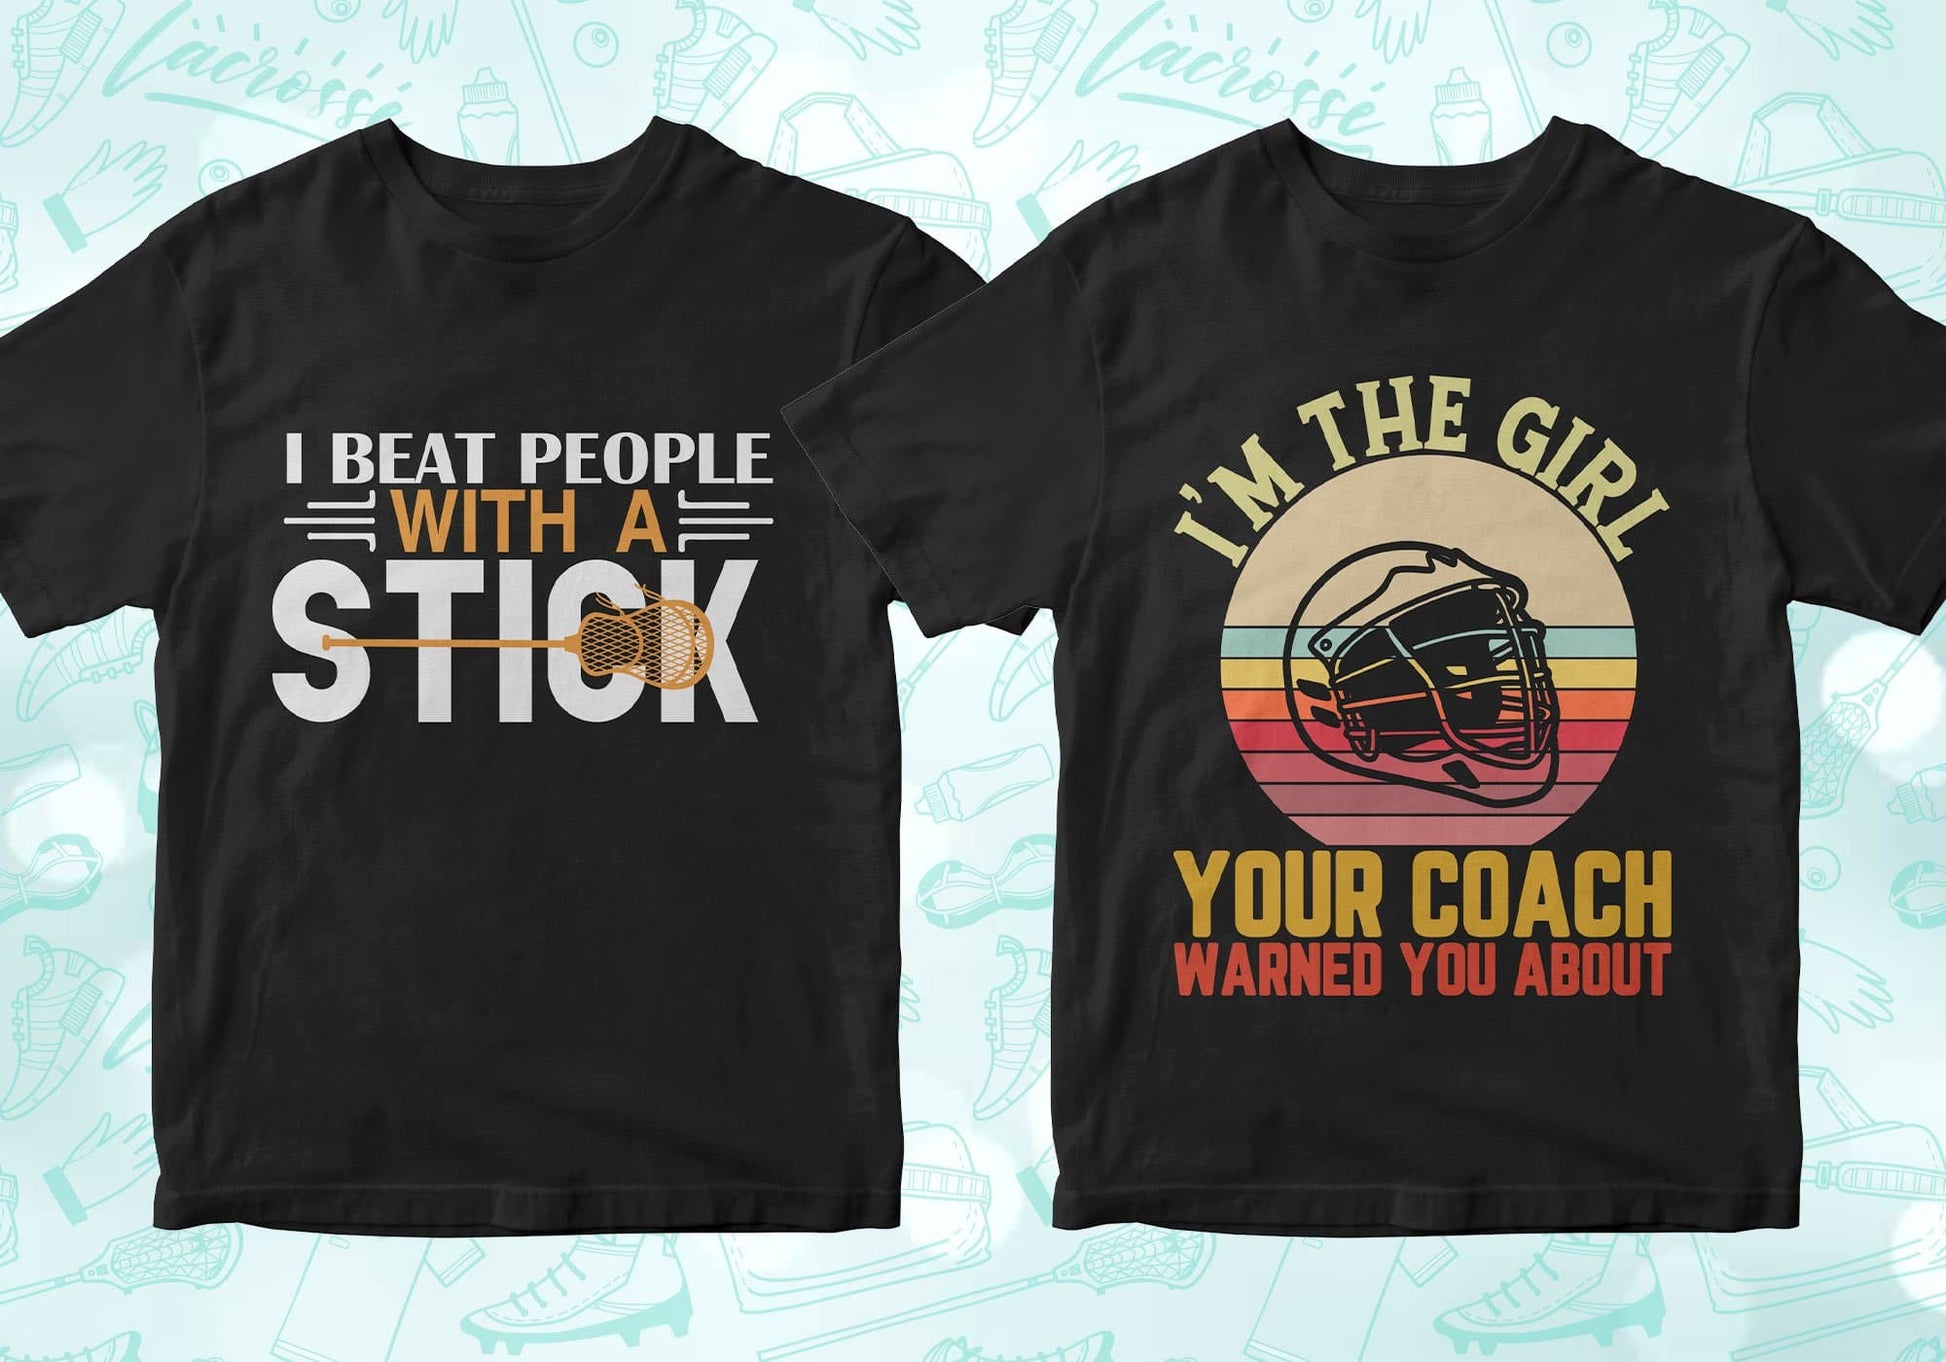 i beat people with a stick, i'm the girl your coach warned you about, lacrosse shirts lacrosse tshirt lacrosse t shirts lacrosse shirt designs lacrosse graphic